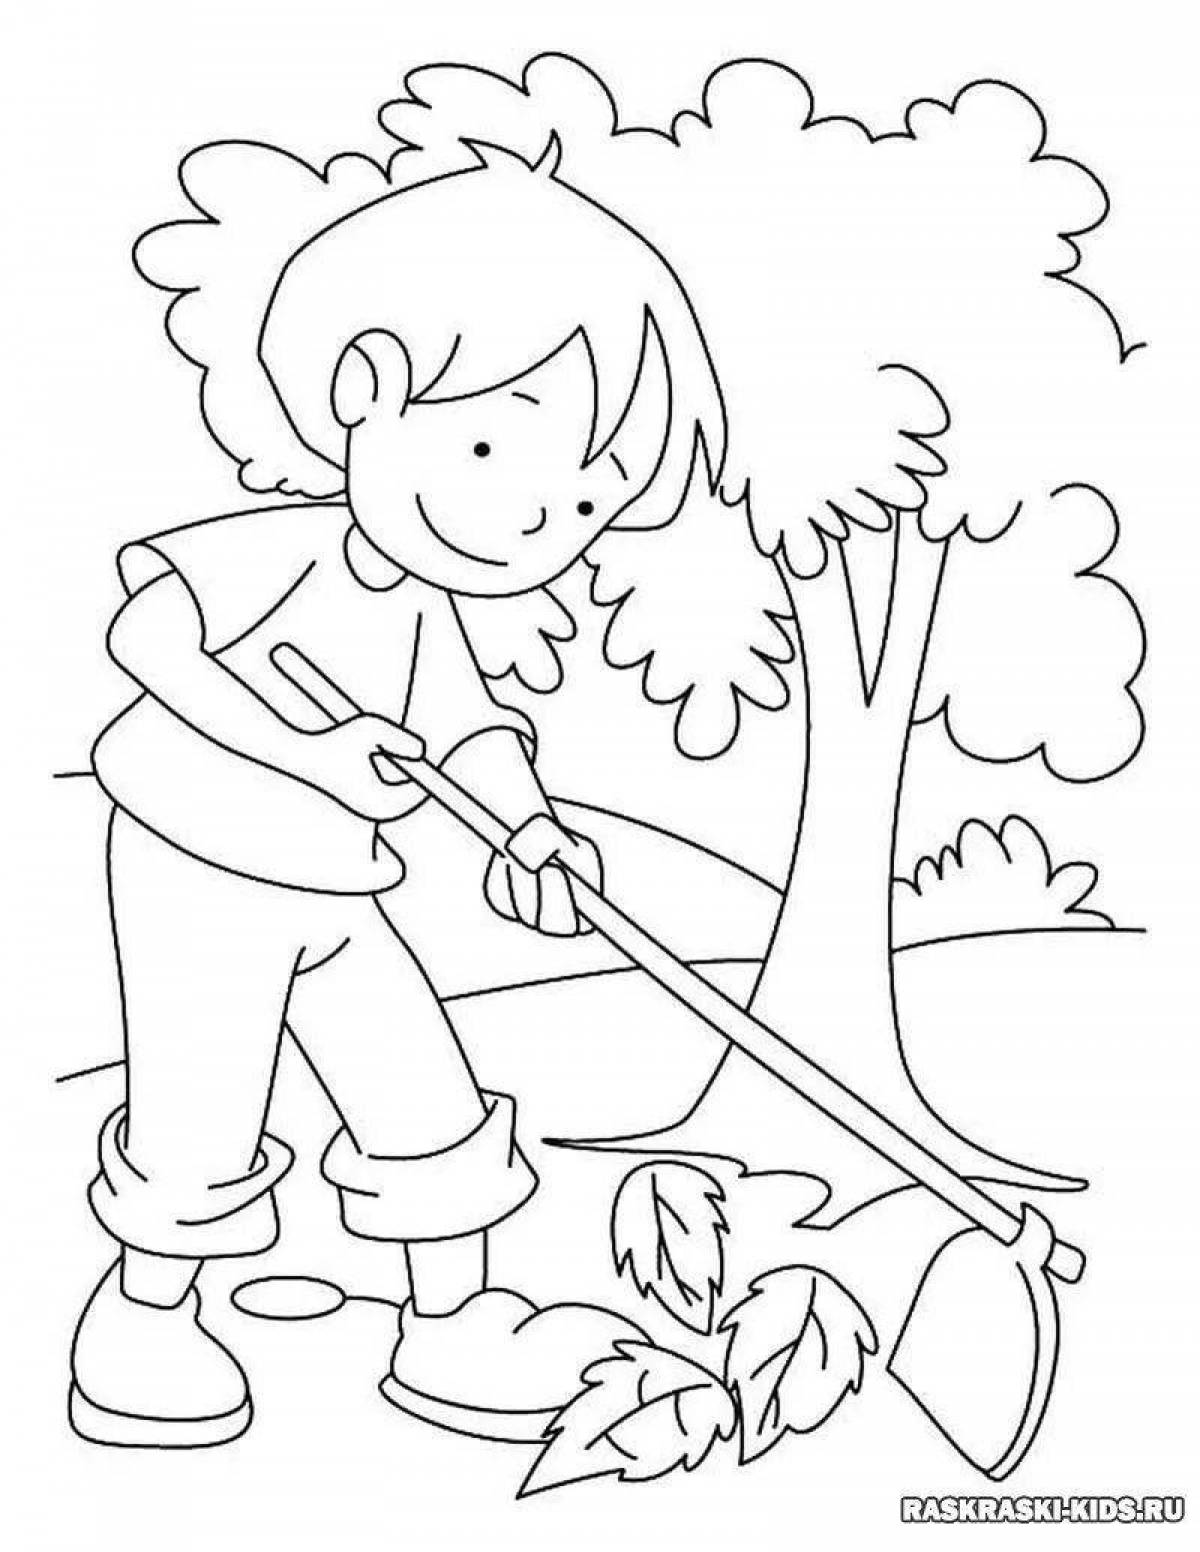 Exciting environmental coloring book